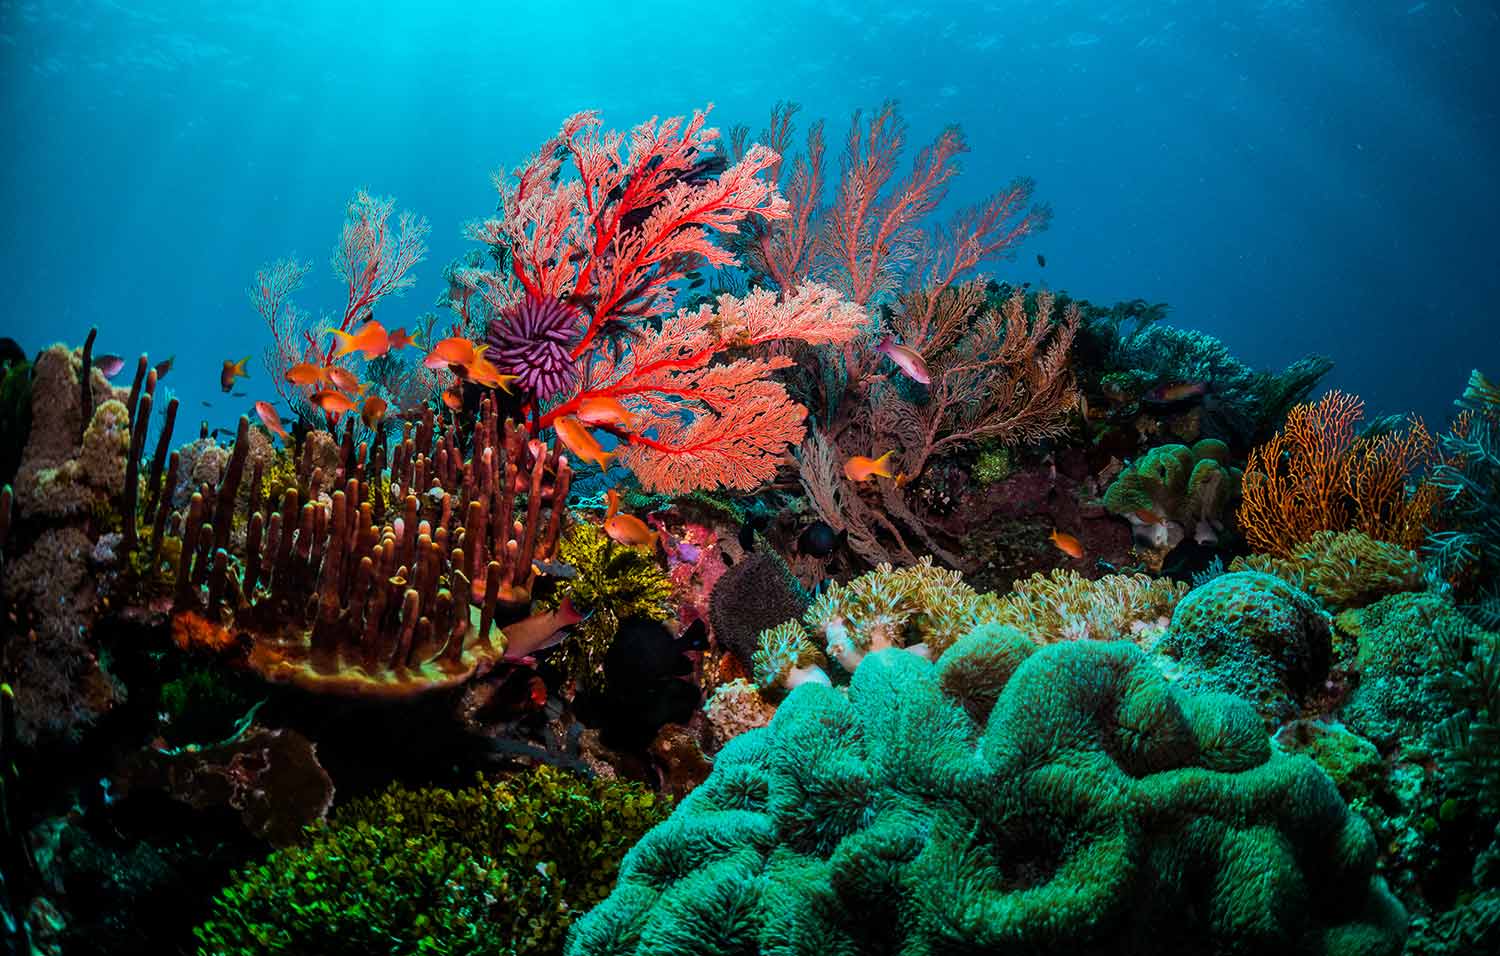 A reef made up of many different corals, surrounded by colourful fish.